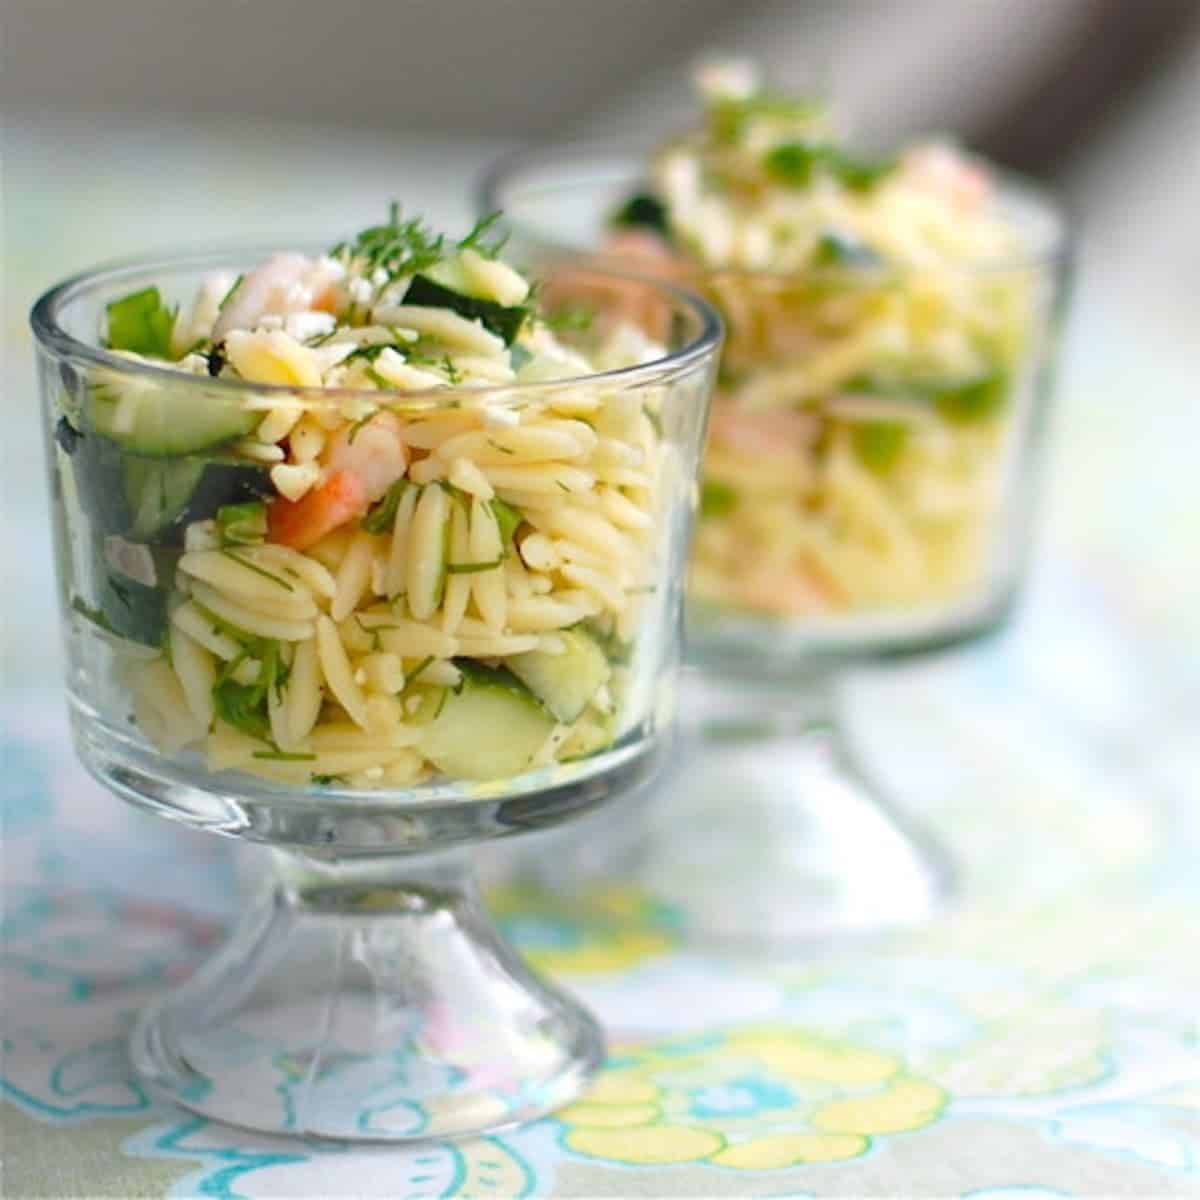 Shrimp and feta orzo in two glass dishes.